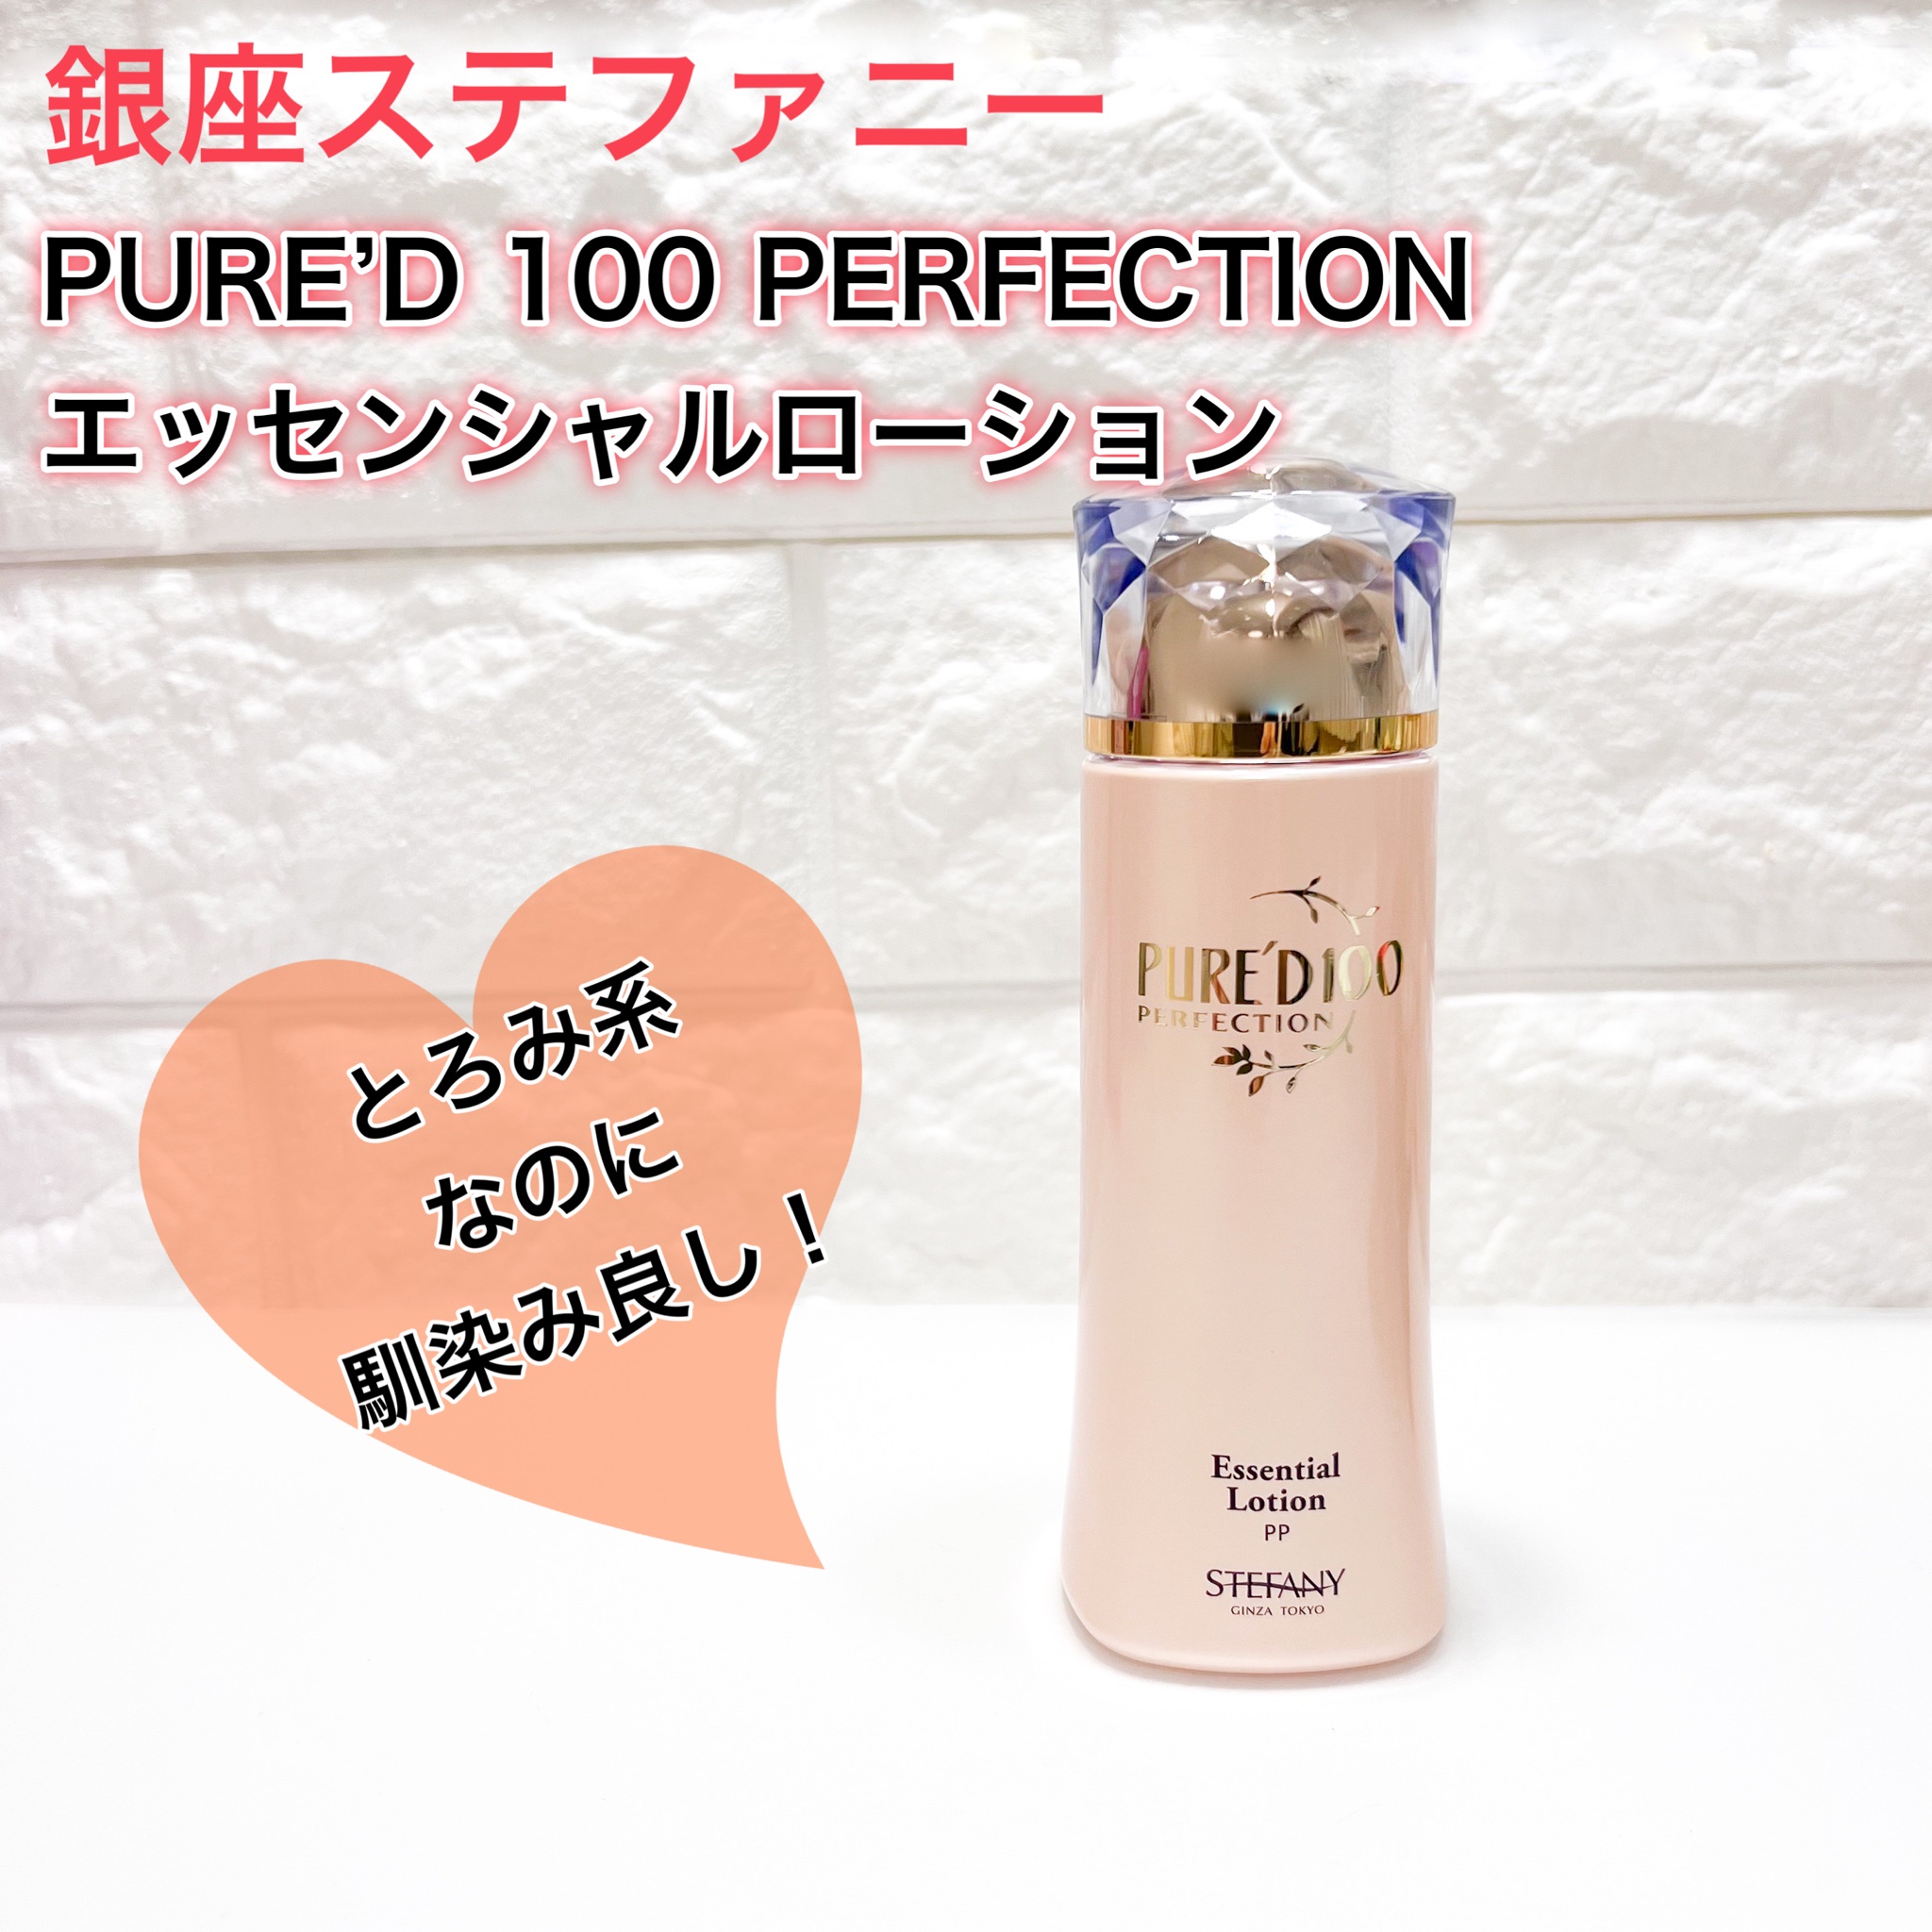 PURE'D 100 PERFECTION / PURE'D 100 PERFECTION エッセンシャル